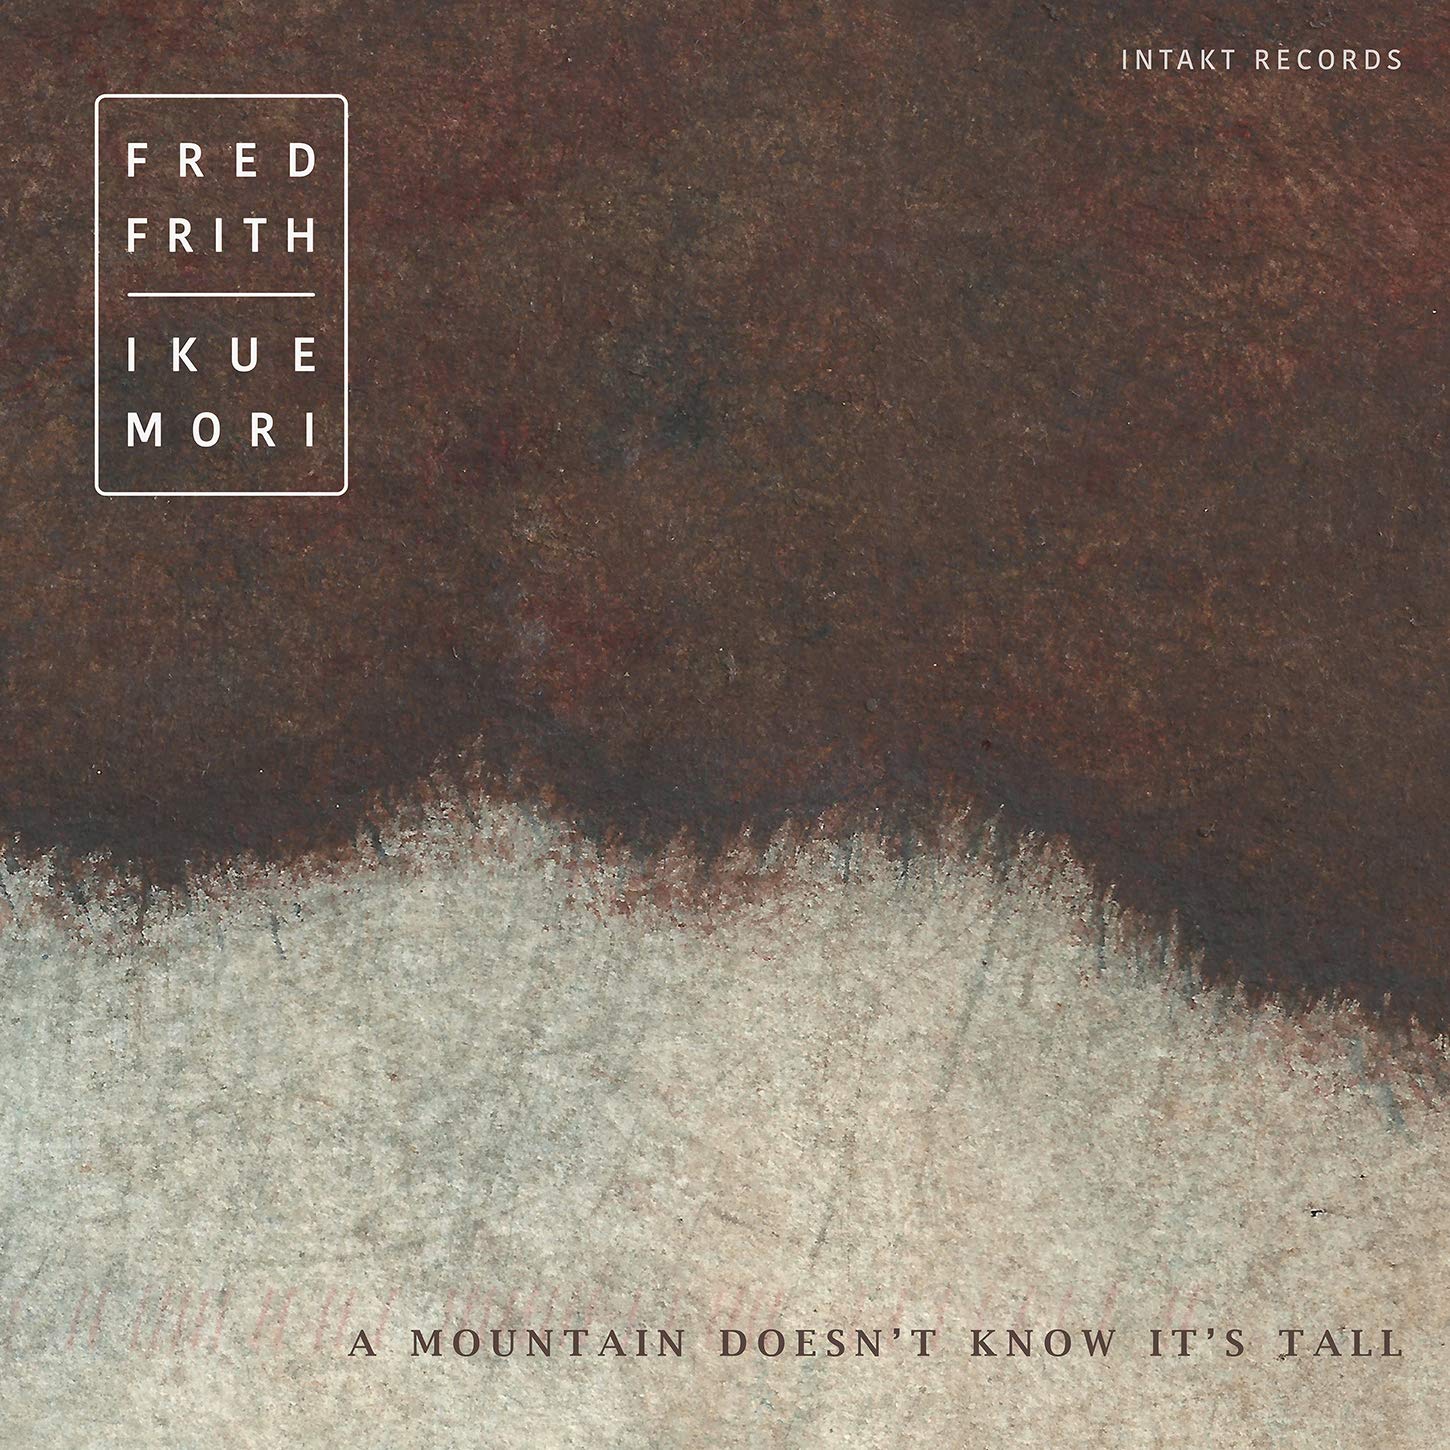 FRED FRITH - Fred Frith / Ikue Mori : Mountain Doesn't Know cover 